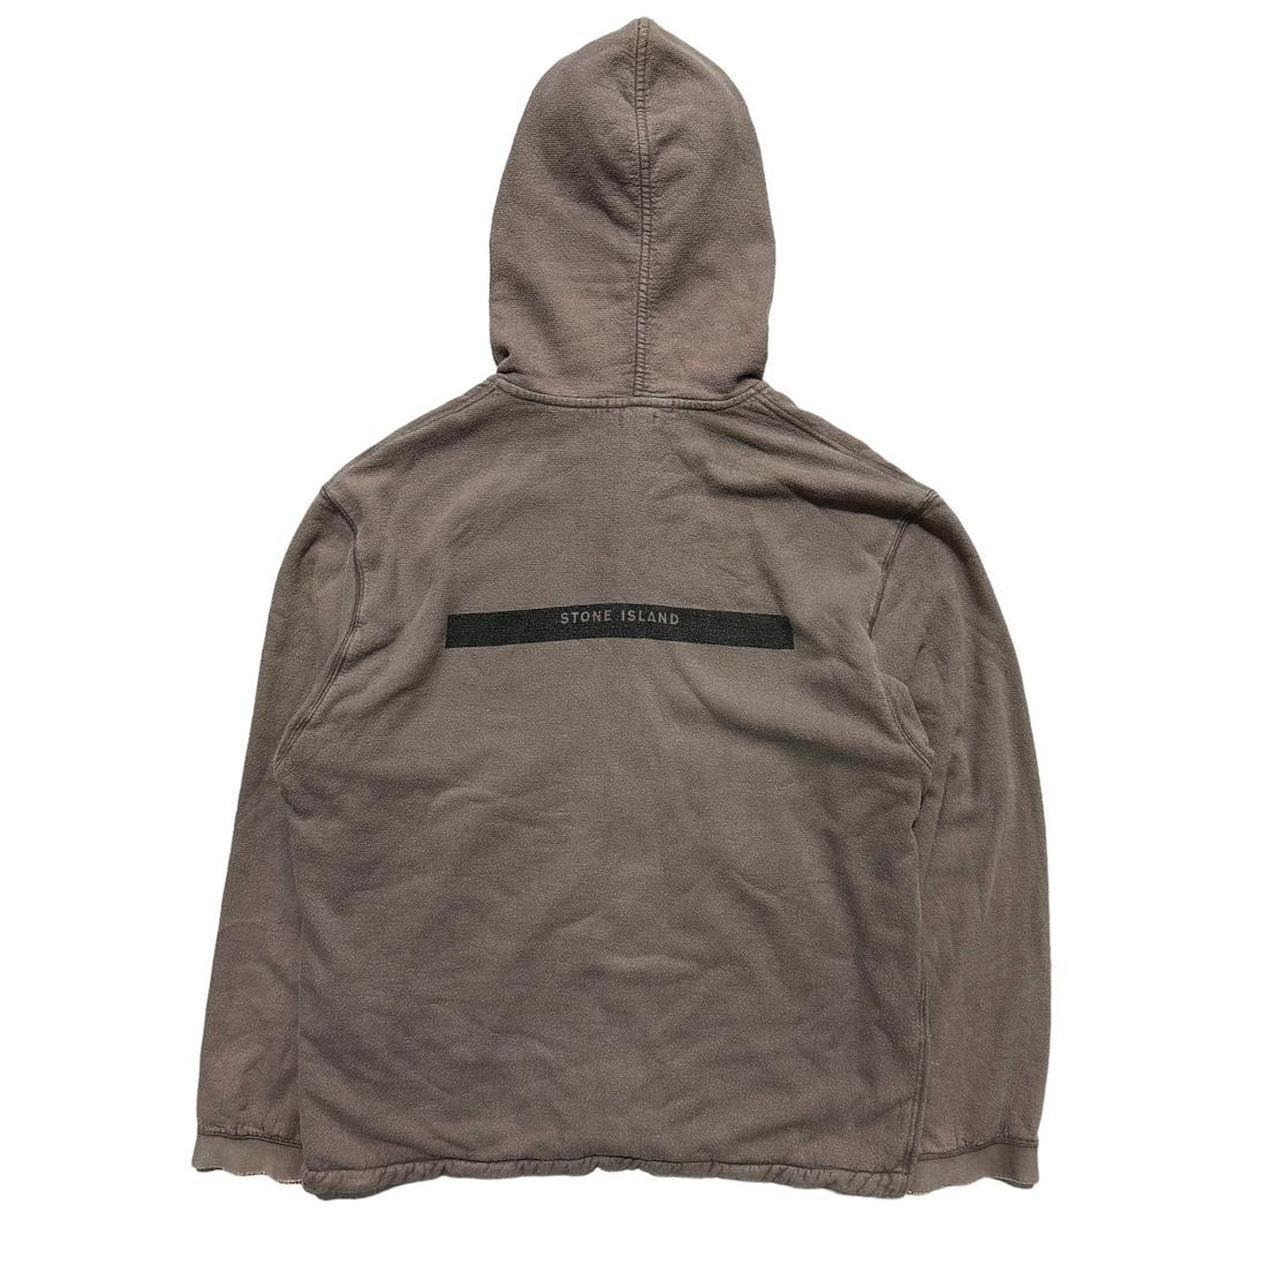 Stone Island Button Up Hooded Cotton Hoodie - Known Source